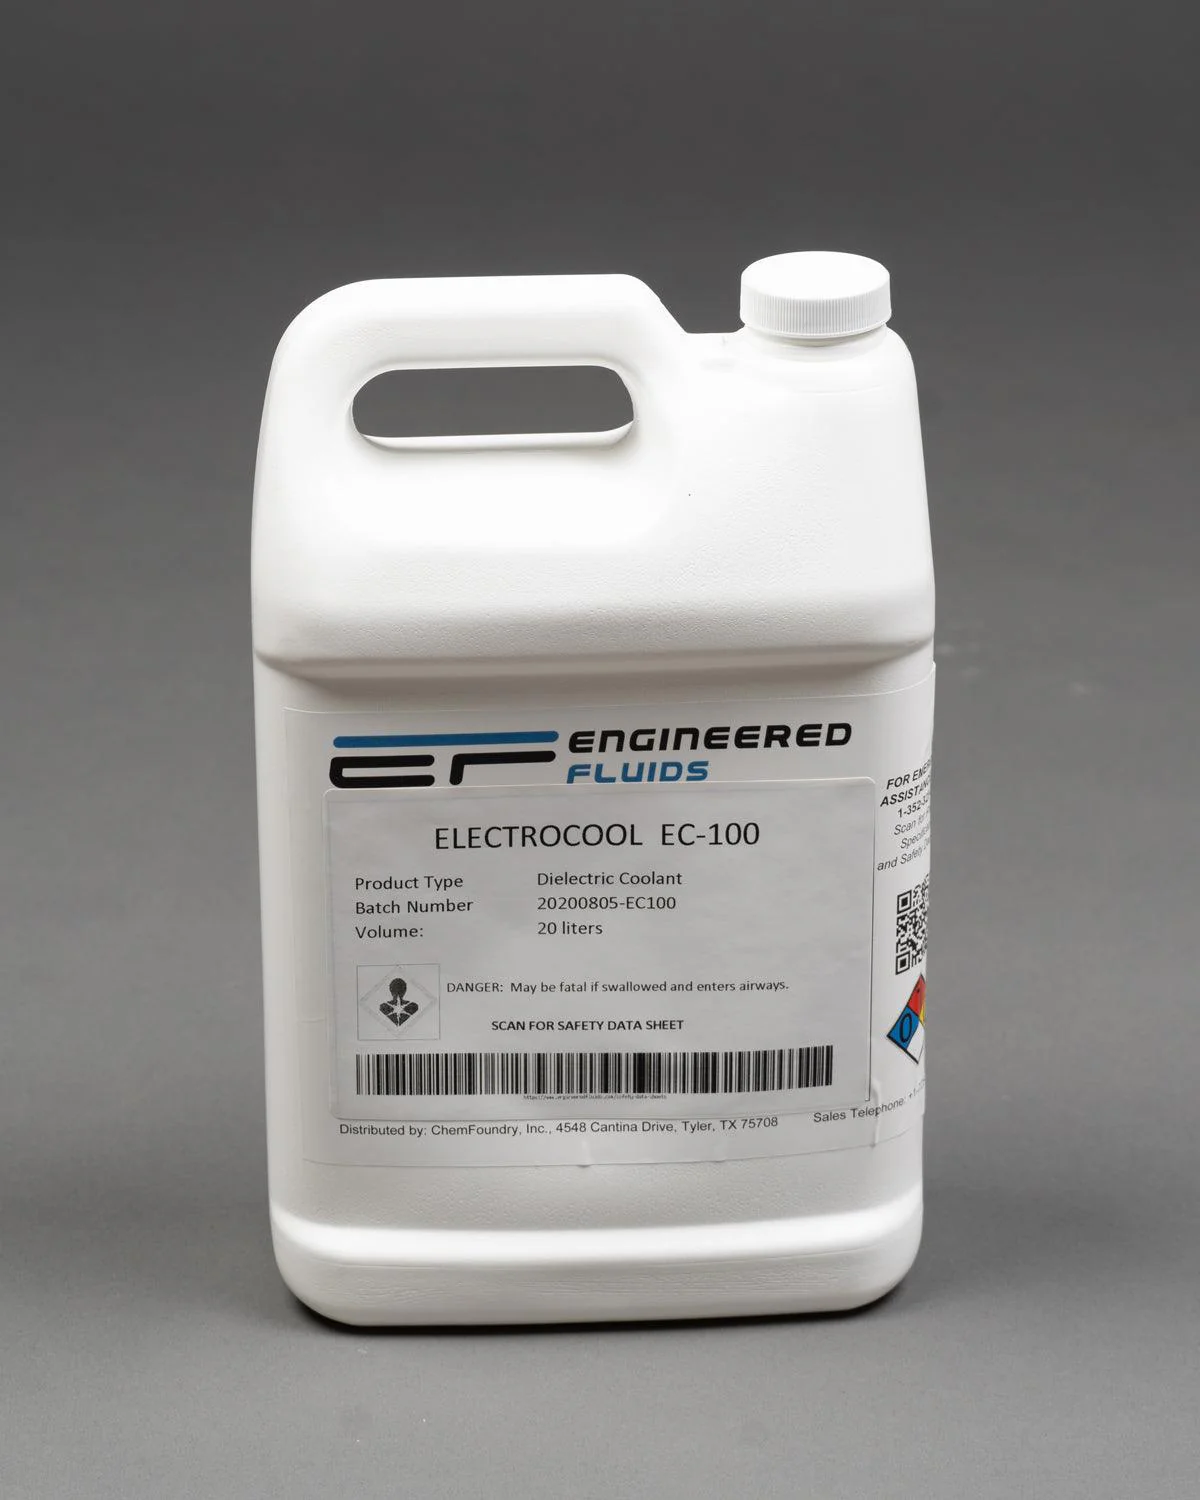 ElectroCool® EC-100 Dielectric Coolant Questions & Answers